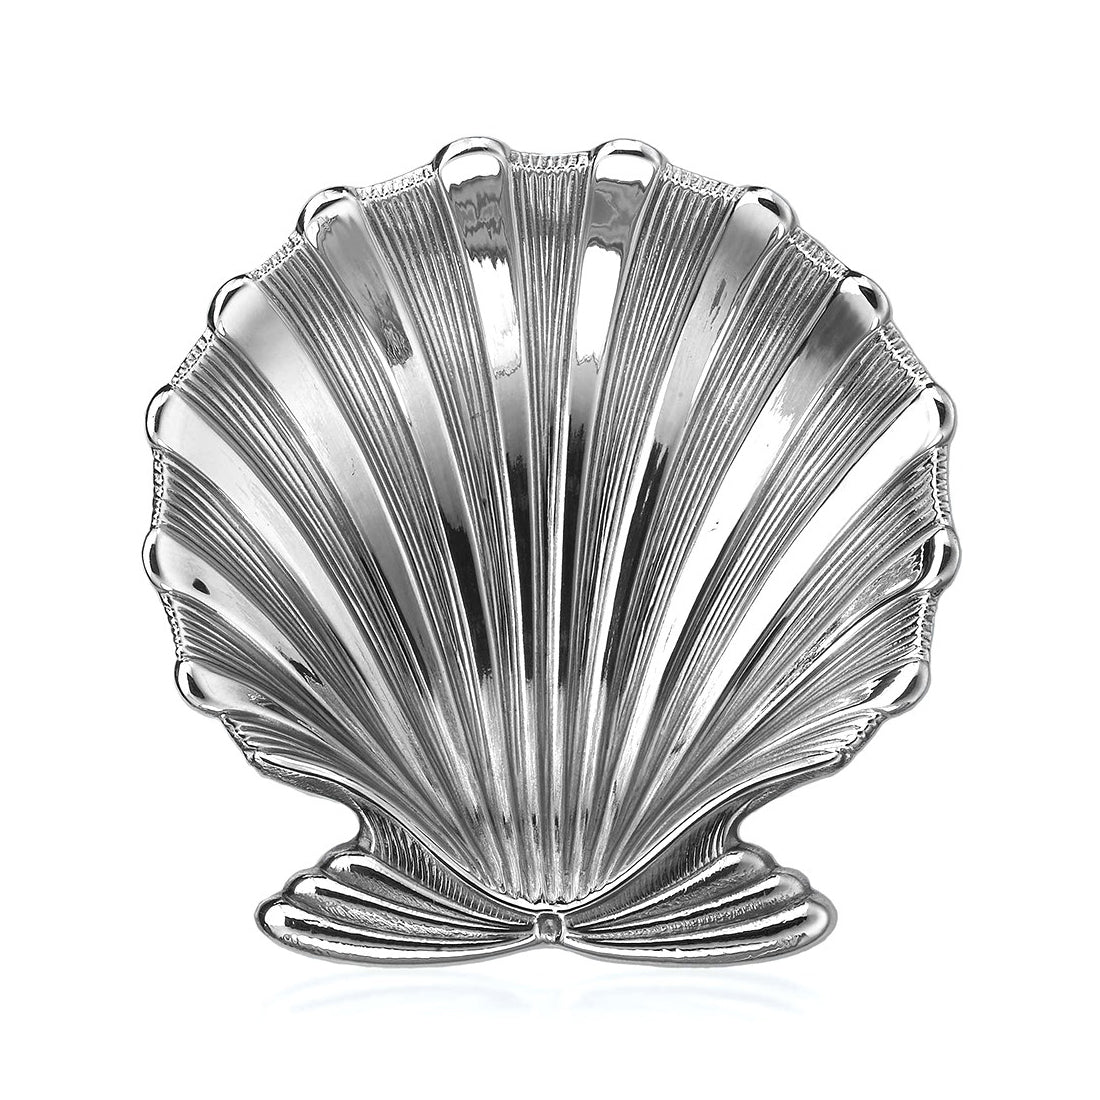 Buccellati Silver - Large Silver Chlamys Shell Dish